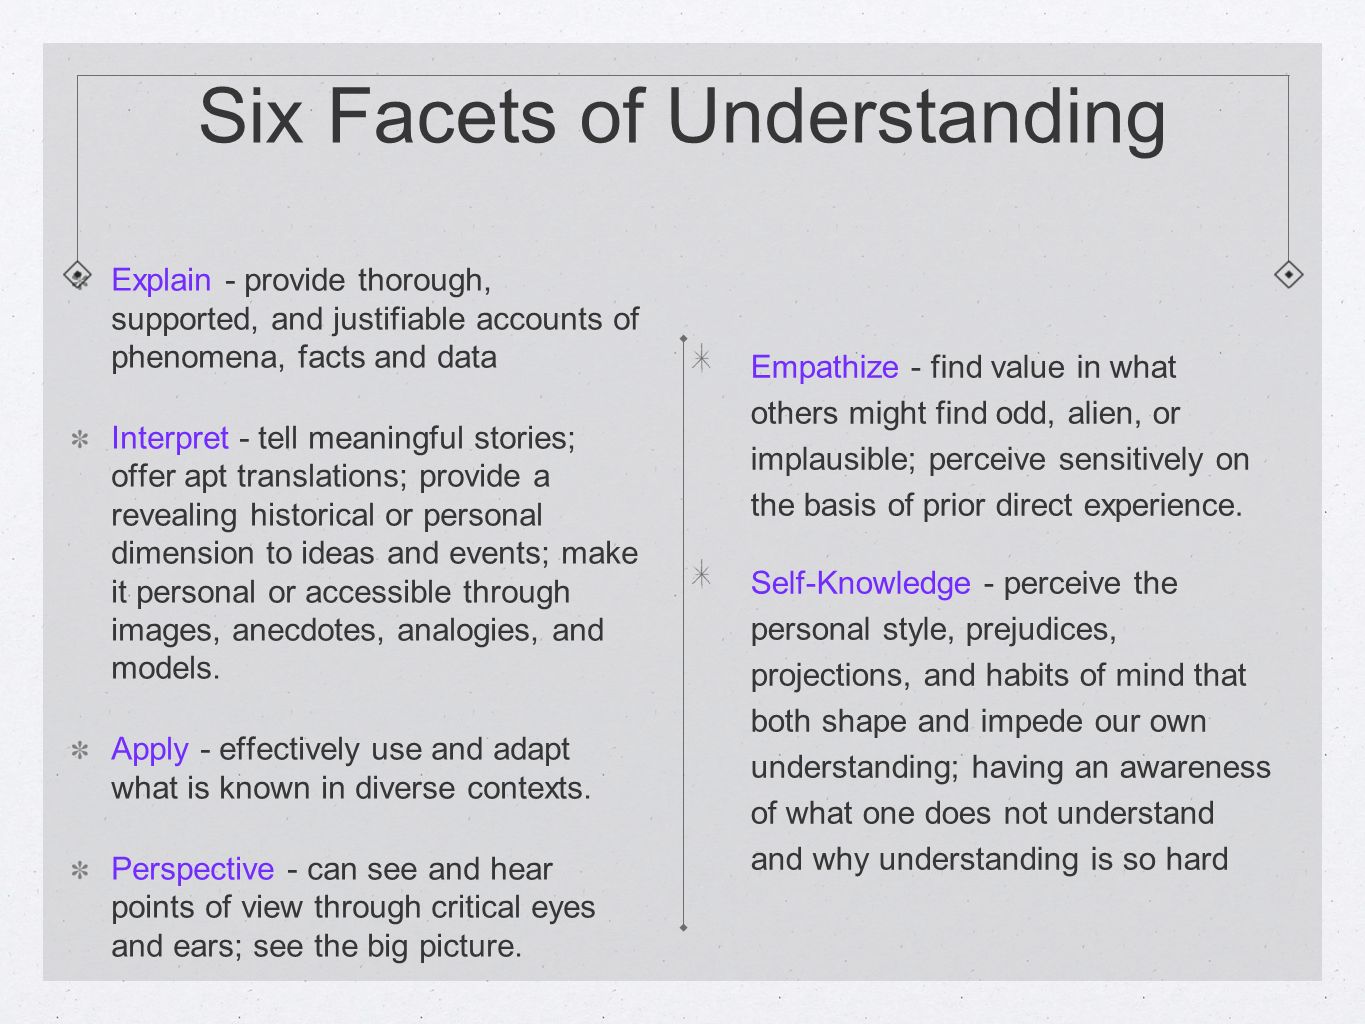 Six Facets of Understanding Explain - provide thorough, supported, and justifiable accounts of phenomena, facts and data Interpret - tell meaningful stories; offer apt translations; provide a revealing historical or personal dimension to ideas and events; make it personal or accessible through images, anecdotes, analogies, and models.